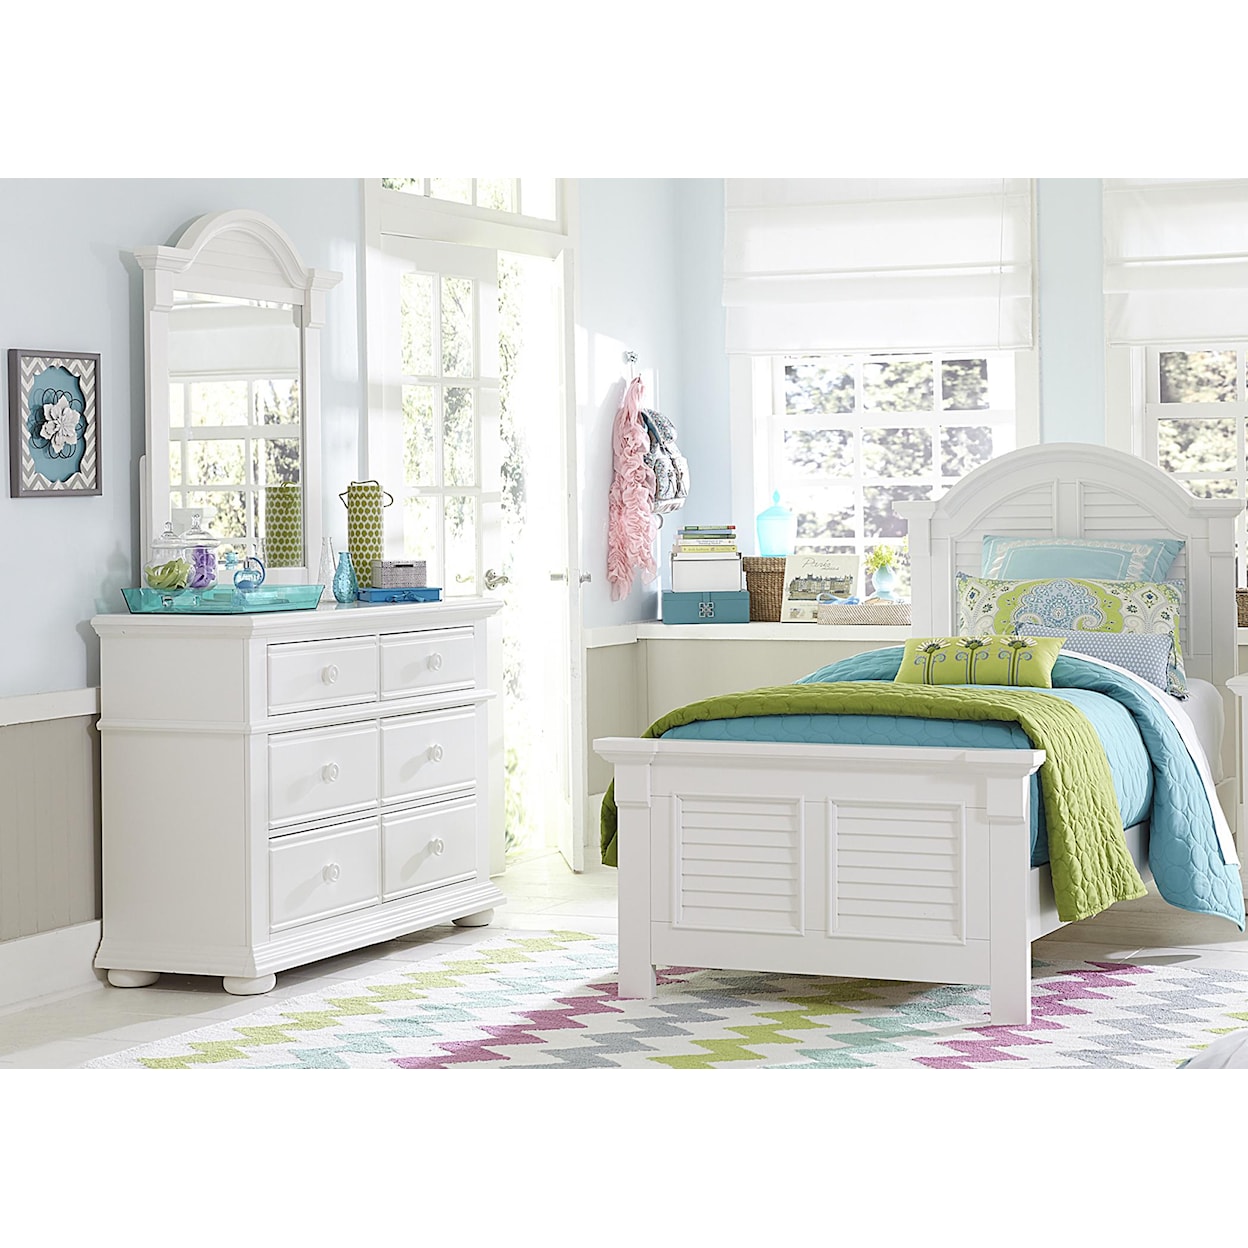 Libby Summer House Twin Bedroom Group